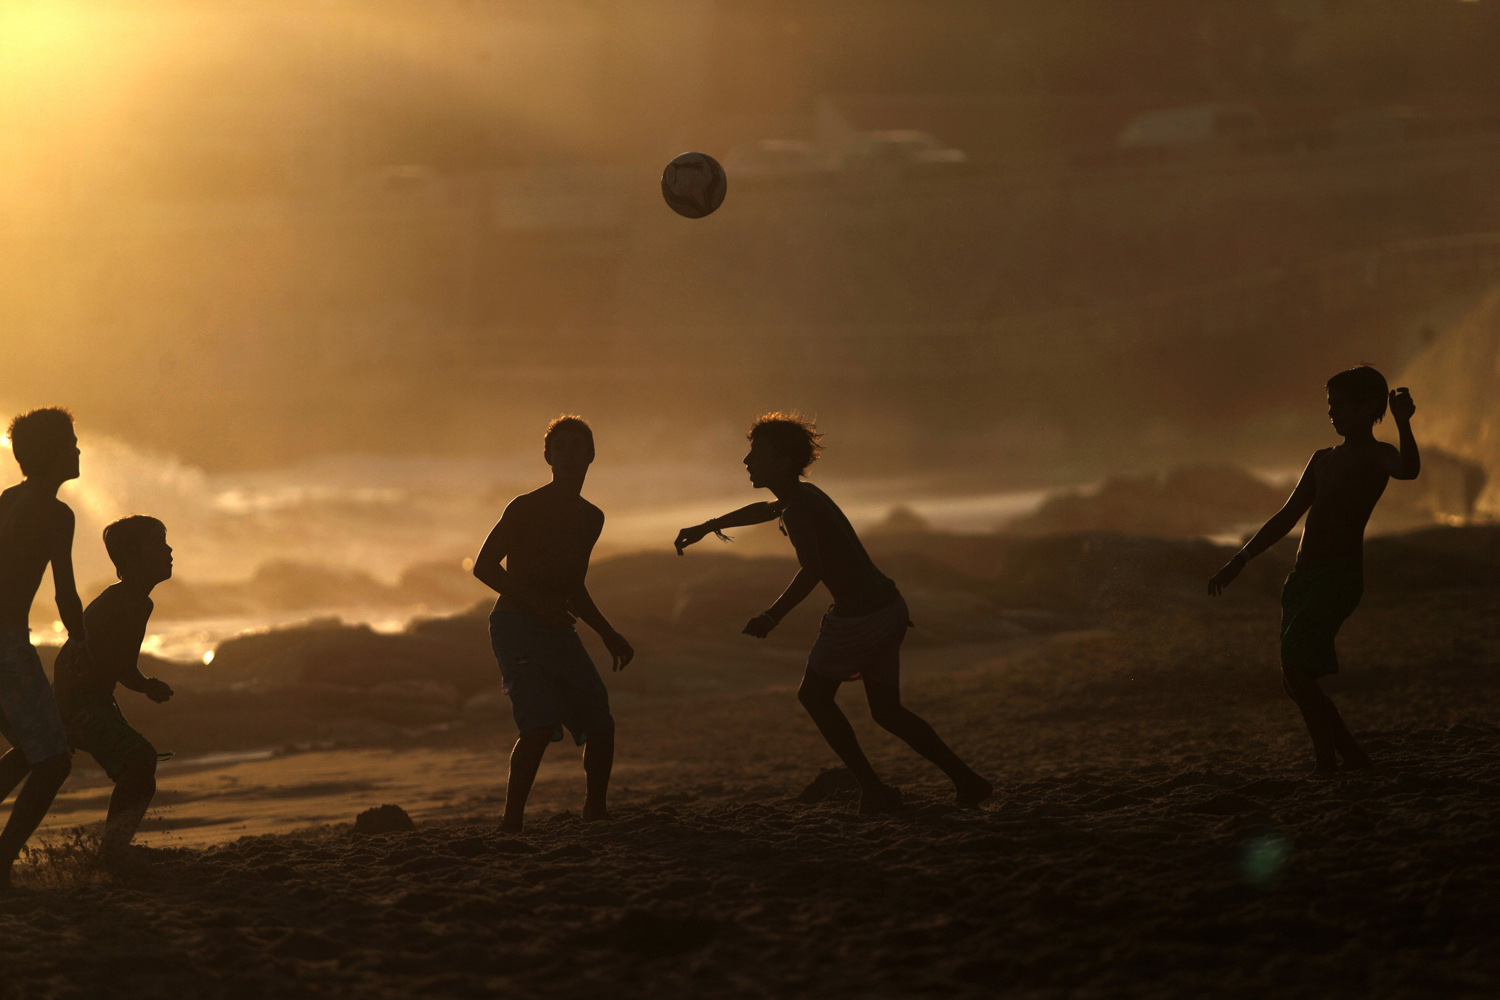 Youngsters play soccer as the sun sets at the Carcavelos beach in Cascais, Portugal on Sept. 2, 2014.